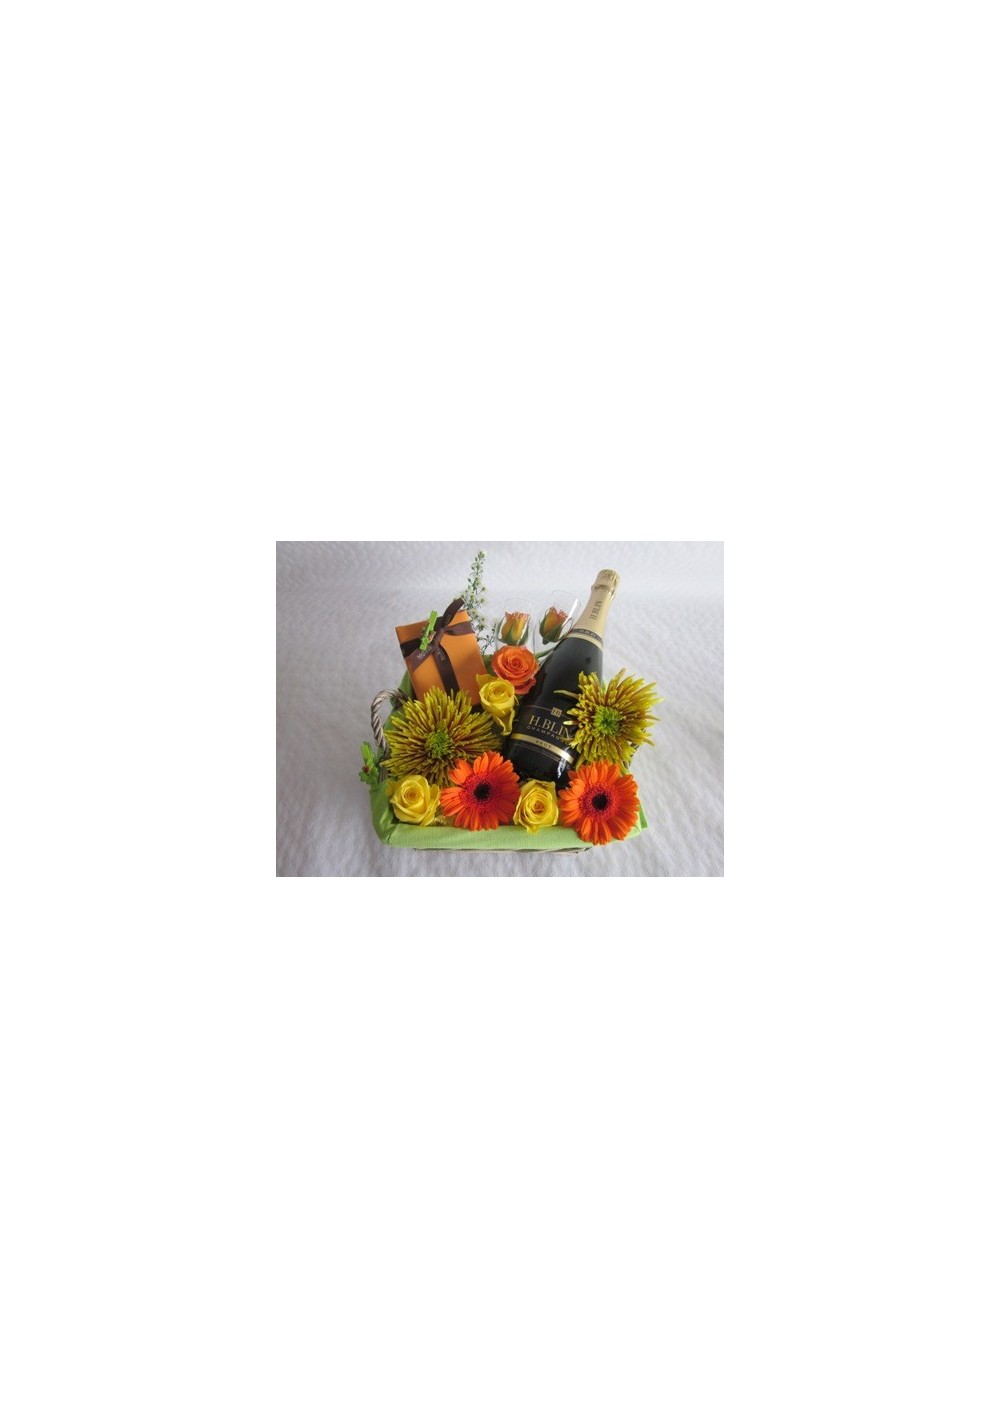 gift basket with beautiful flowers